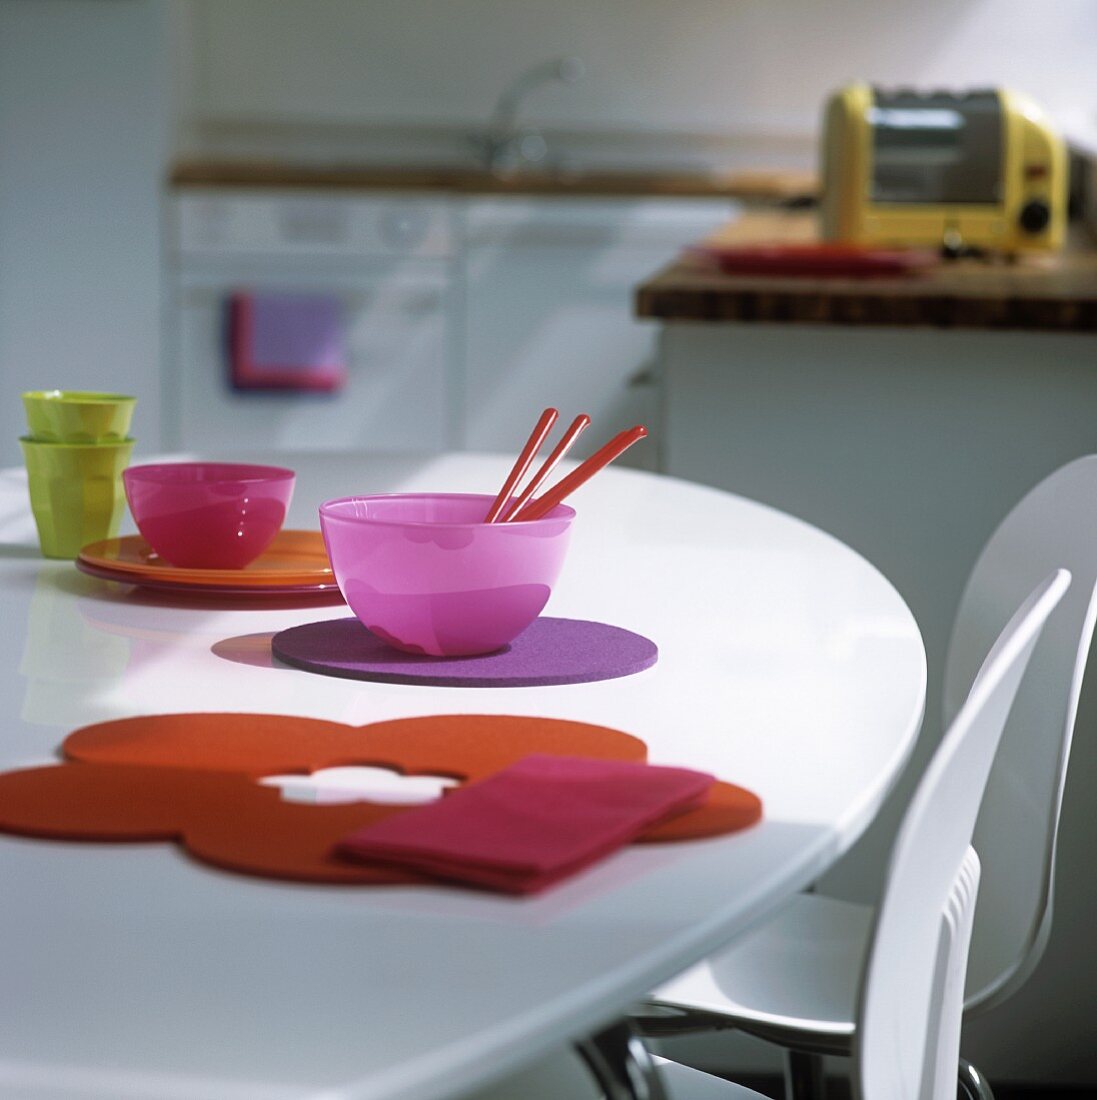 Coloured glass bowls and felt coasters on a white table